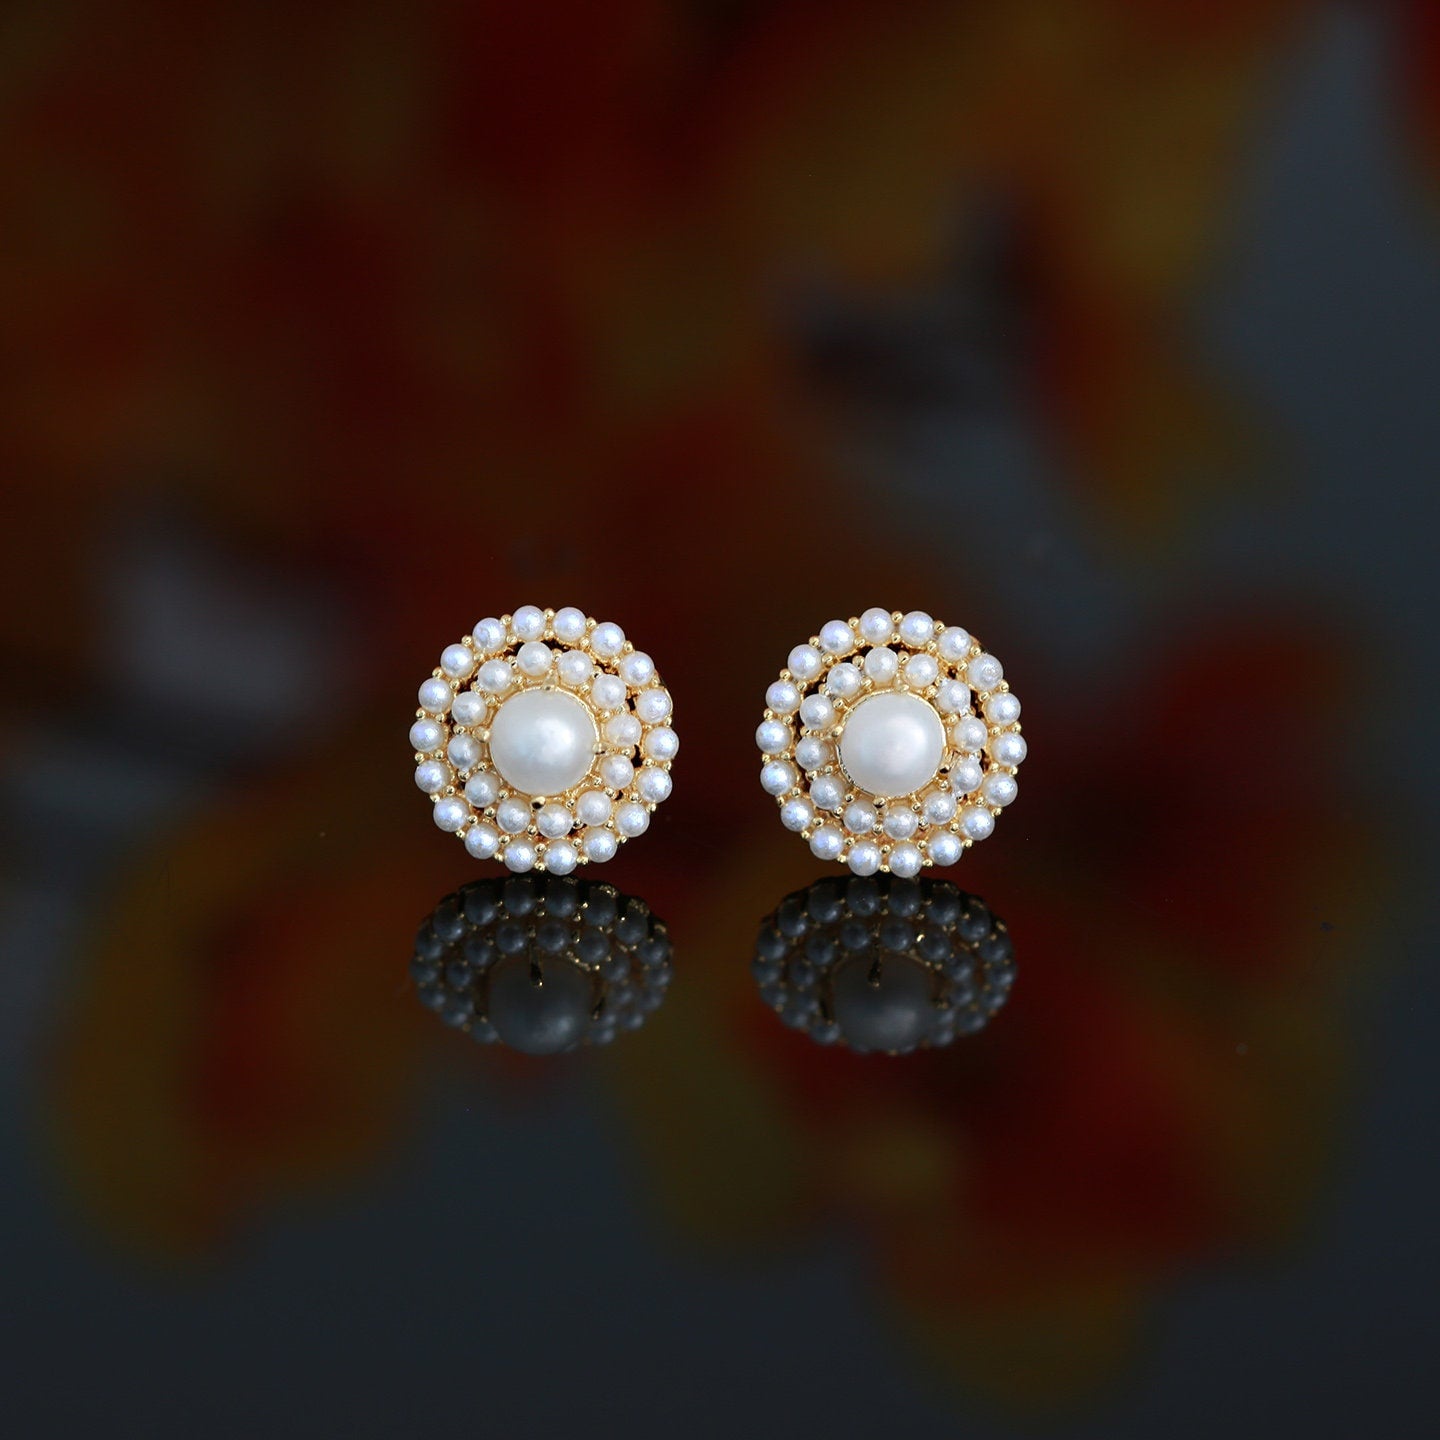 Amazon.com: Real Pearl Earrings for Women with Genuine AAAA Quality White  Freshwater Cultured Pearls | 14K Gold Plated 925 Sterling Silver Earrings  for Women - THE PEARL SOURCE: Clothing, Shoes & Jewelry